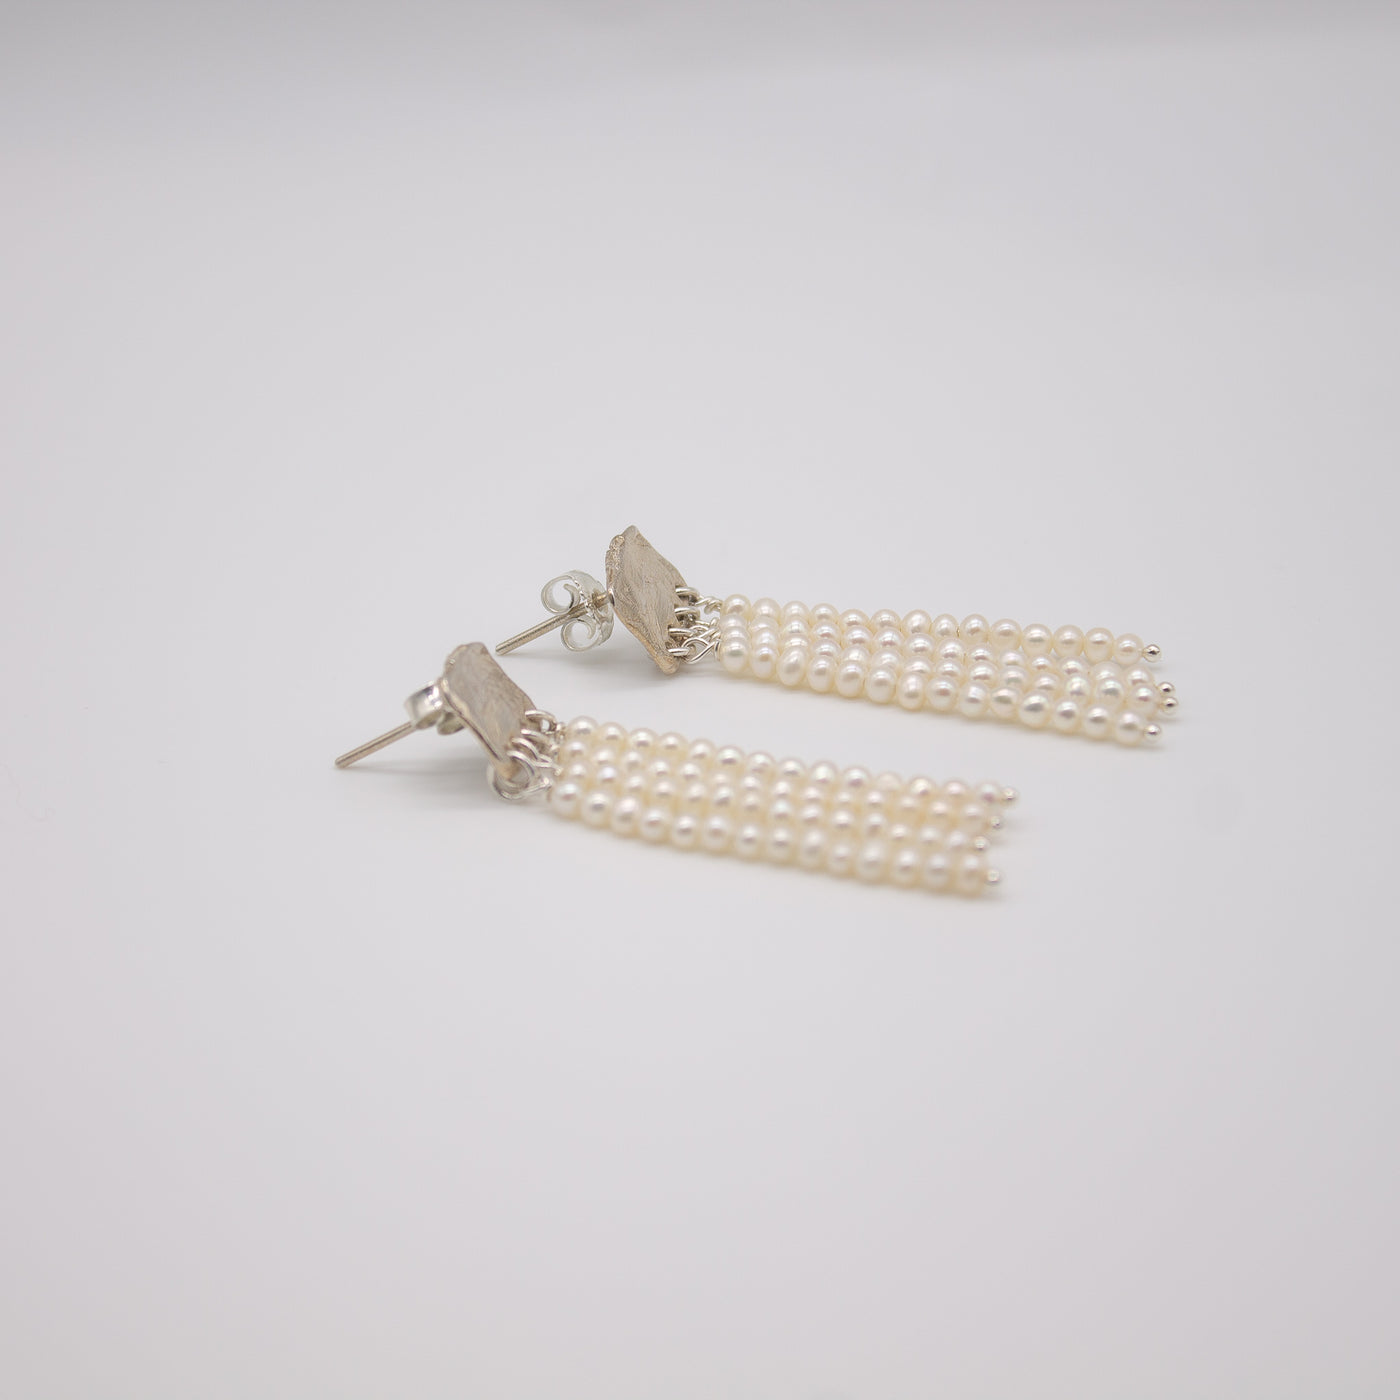 SUNDBY // Ear studs made of fine silver with delicate freshwater pearls